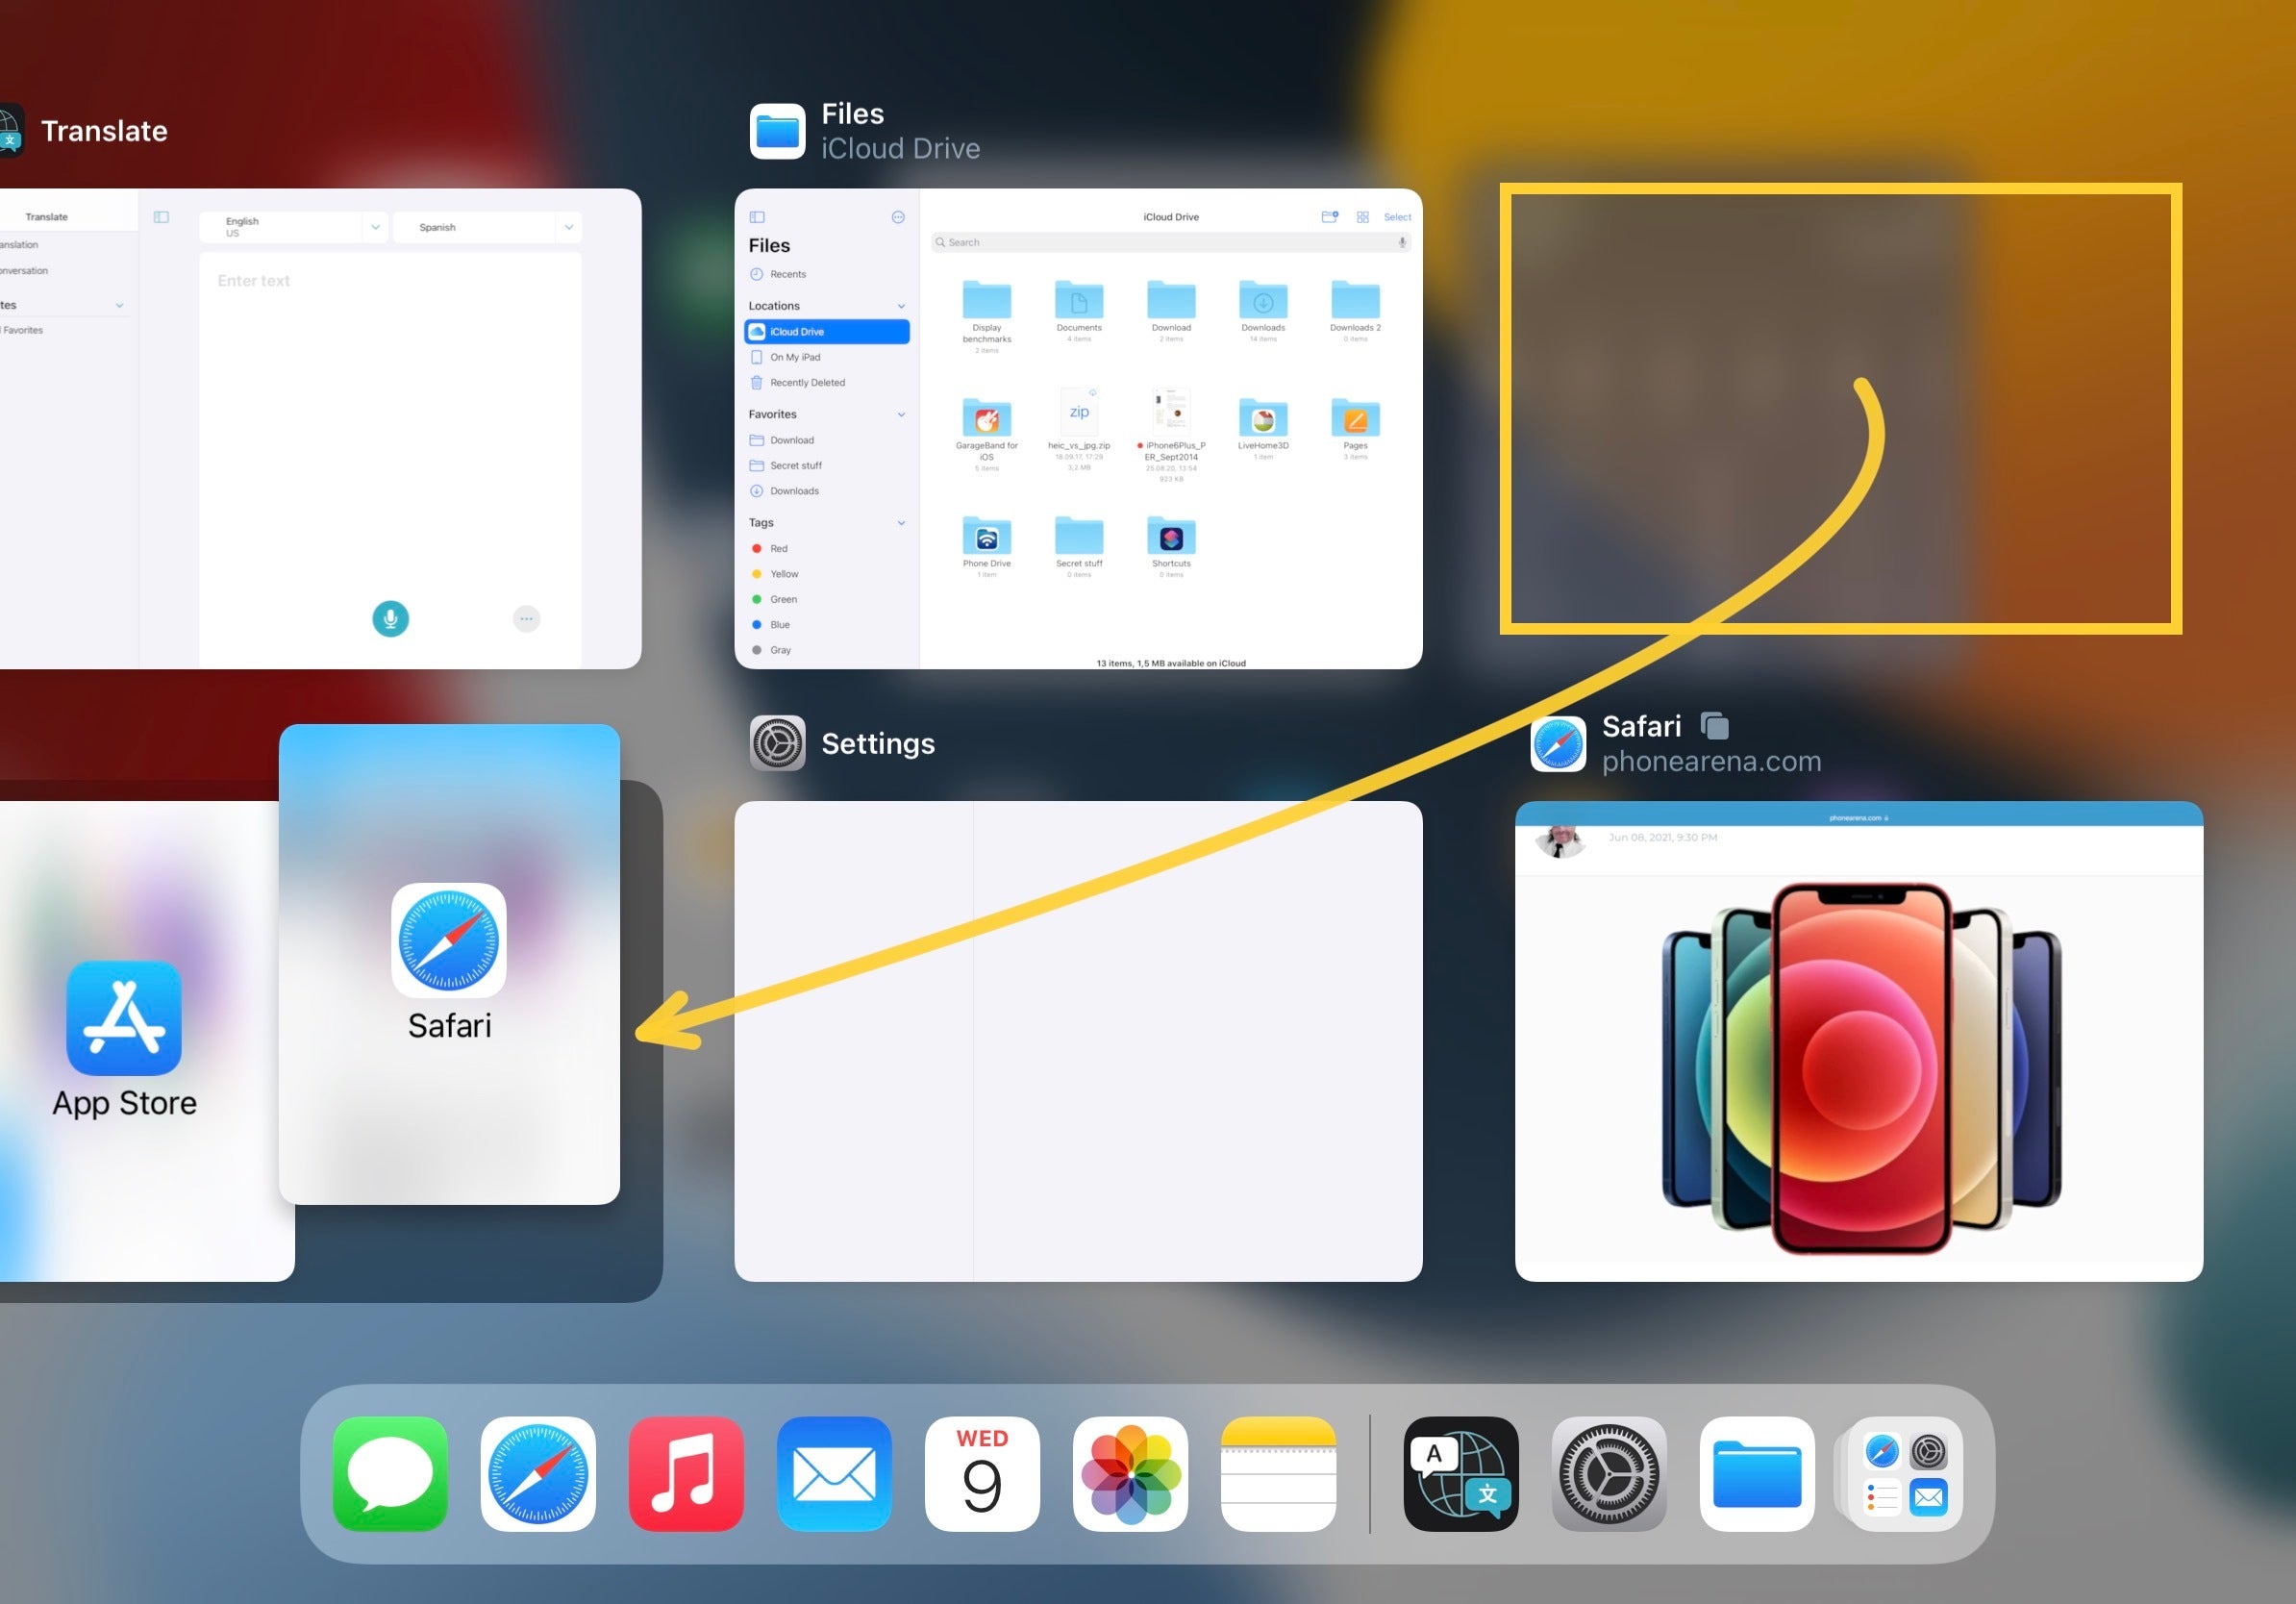 How to use the new iPadOS 15 multitasking features